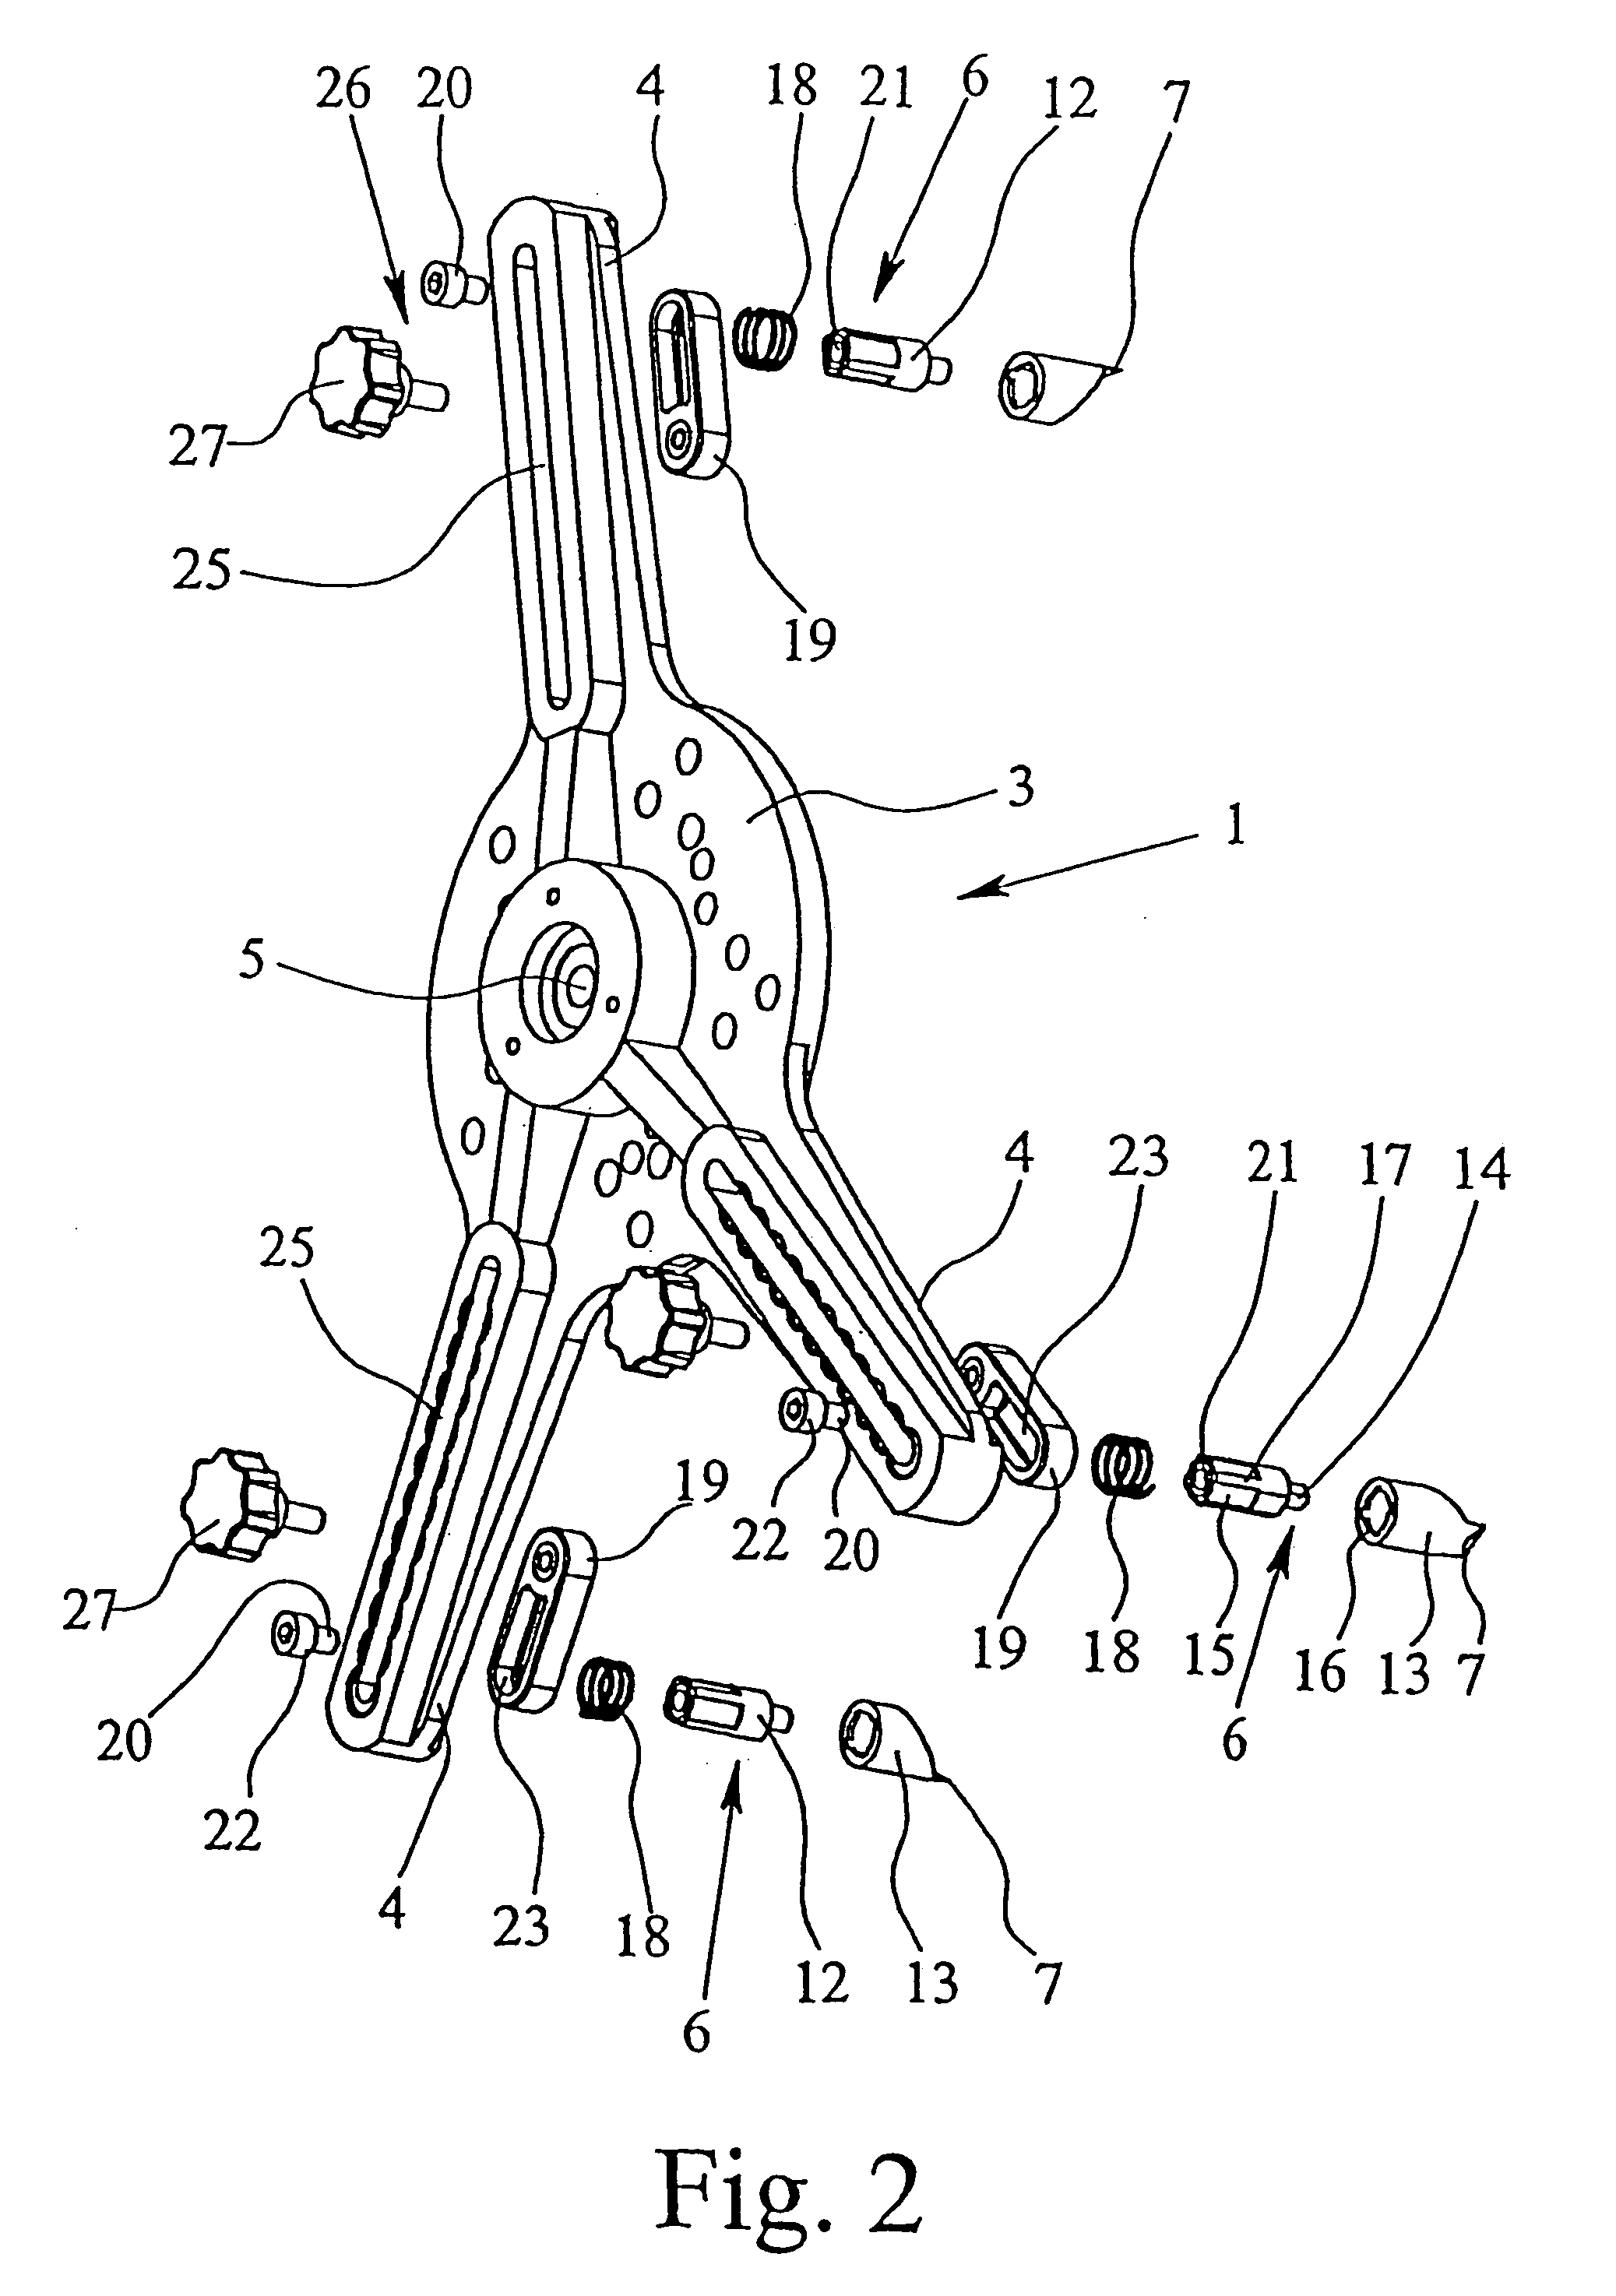 Retaining device for a wheel alignment analyzer